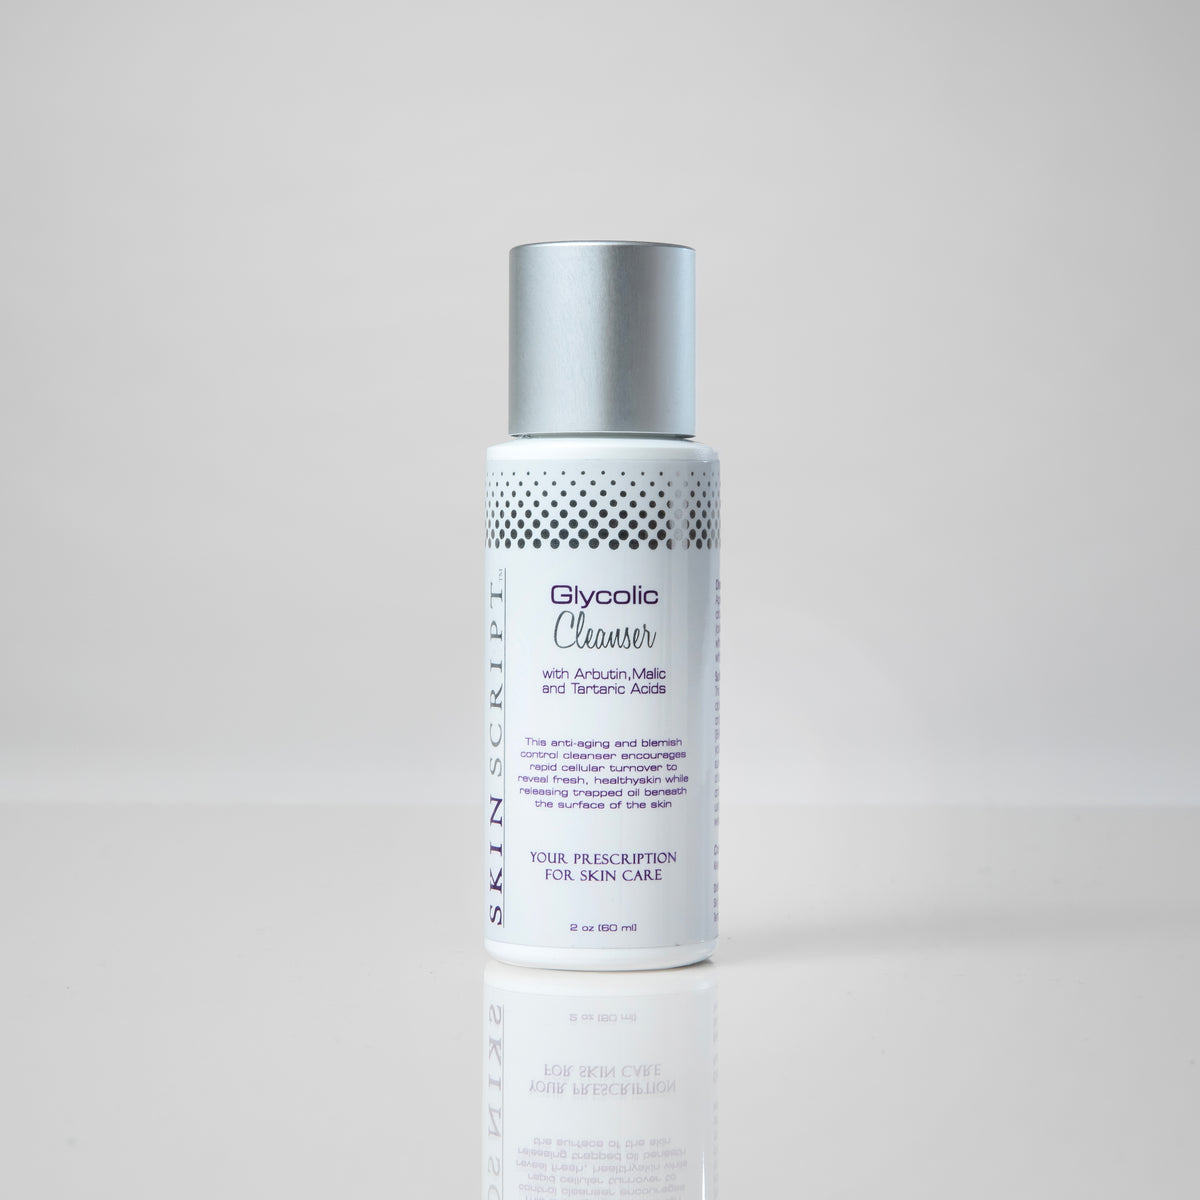 The Glycolic Cleanser is a potent, clinical strength foaming cleanser that contains a blend of 17% glycolic acid and other alpha hydroxy acids to revitalize and refresh the skin. It works by exfoliating the uppermost layer of dead skin cells, revealing a smoother, radiant complexion. 2 ounces